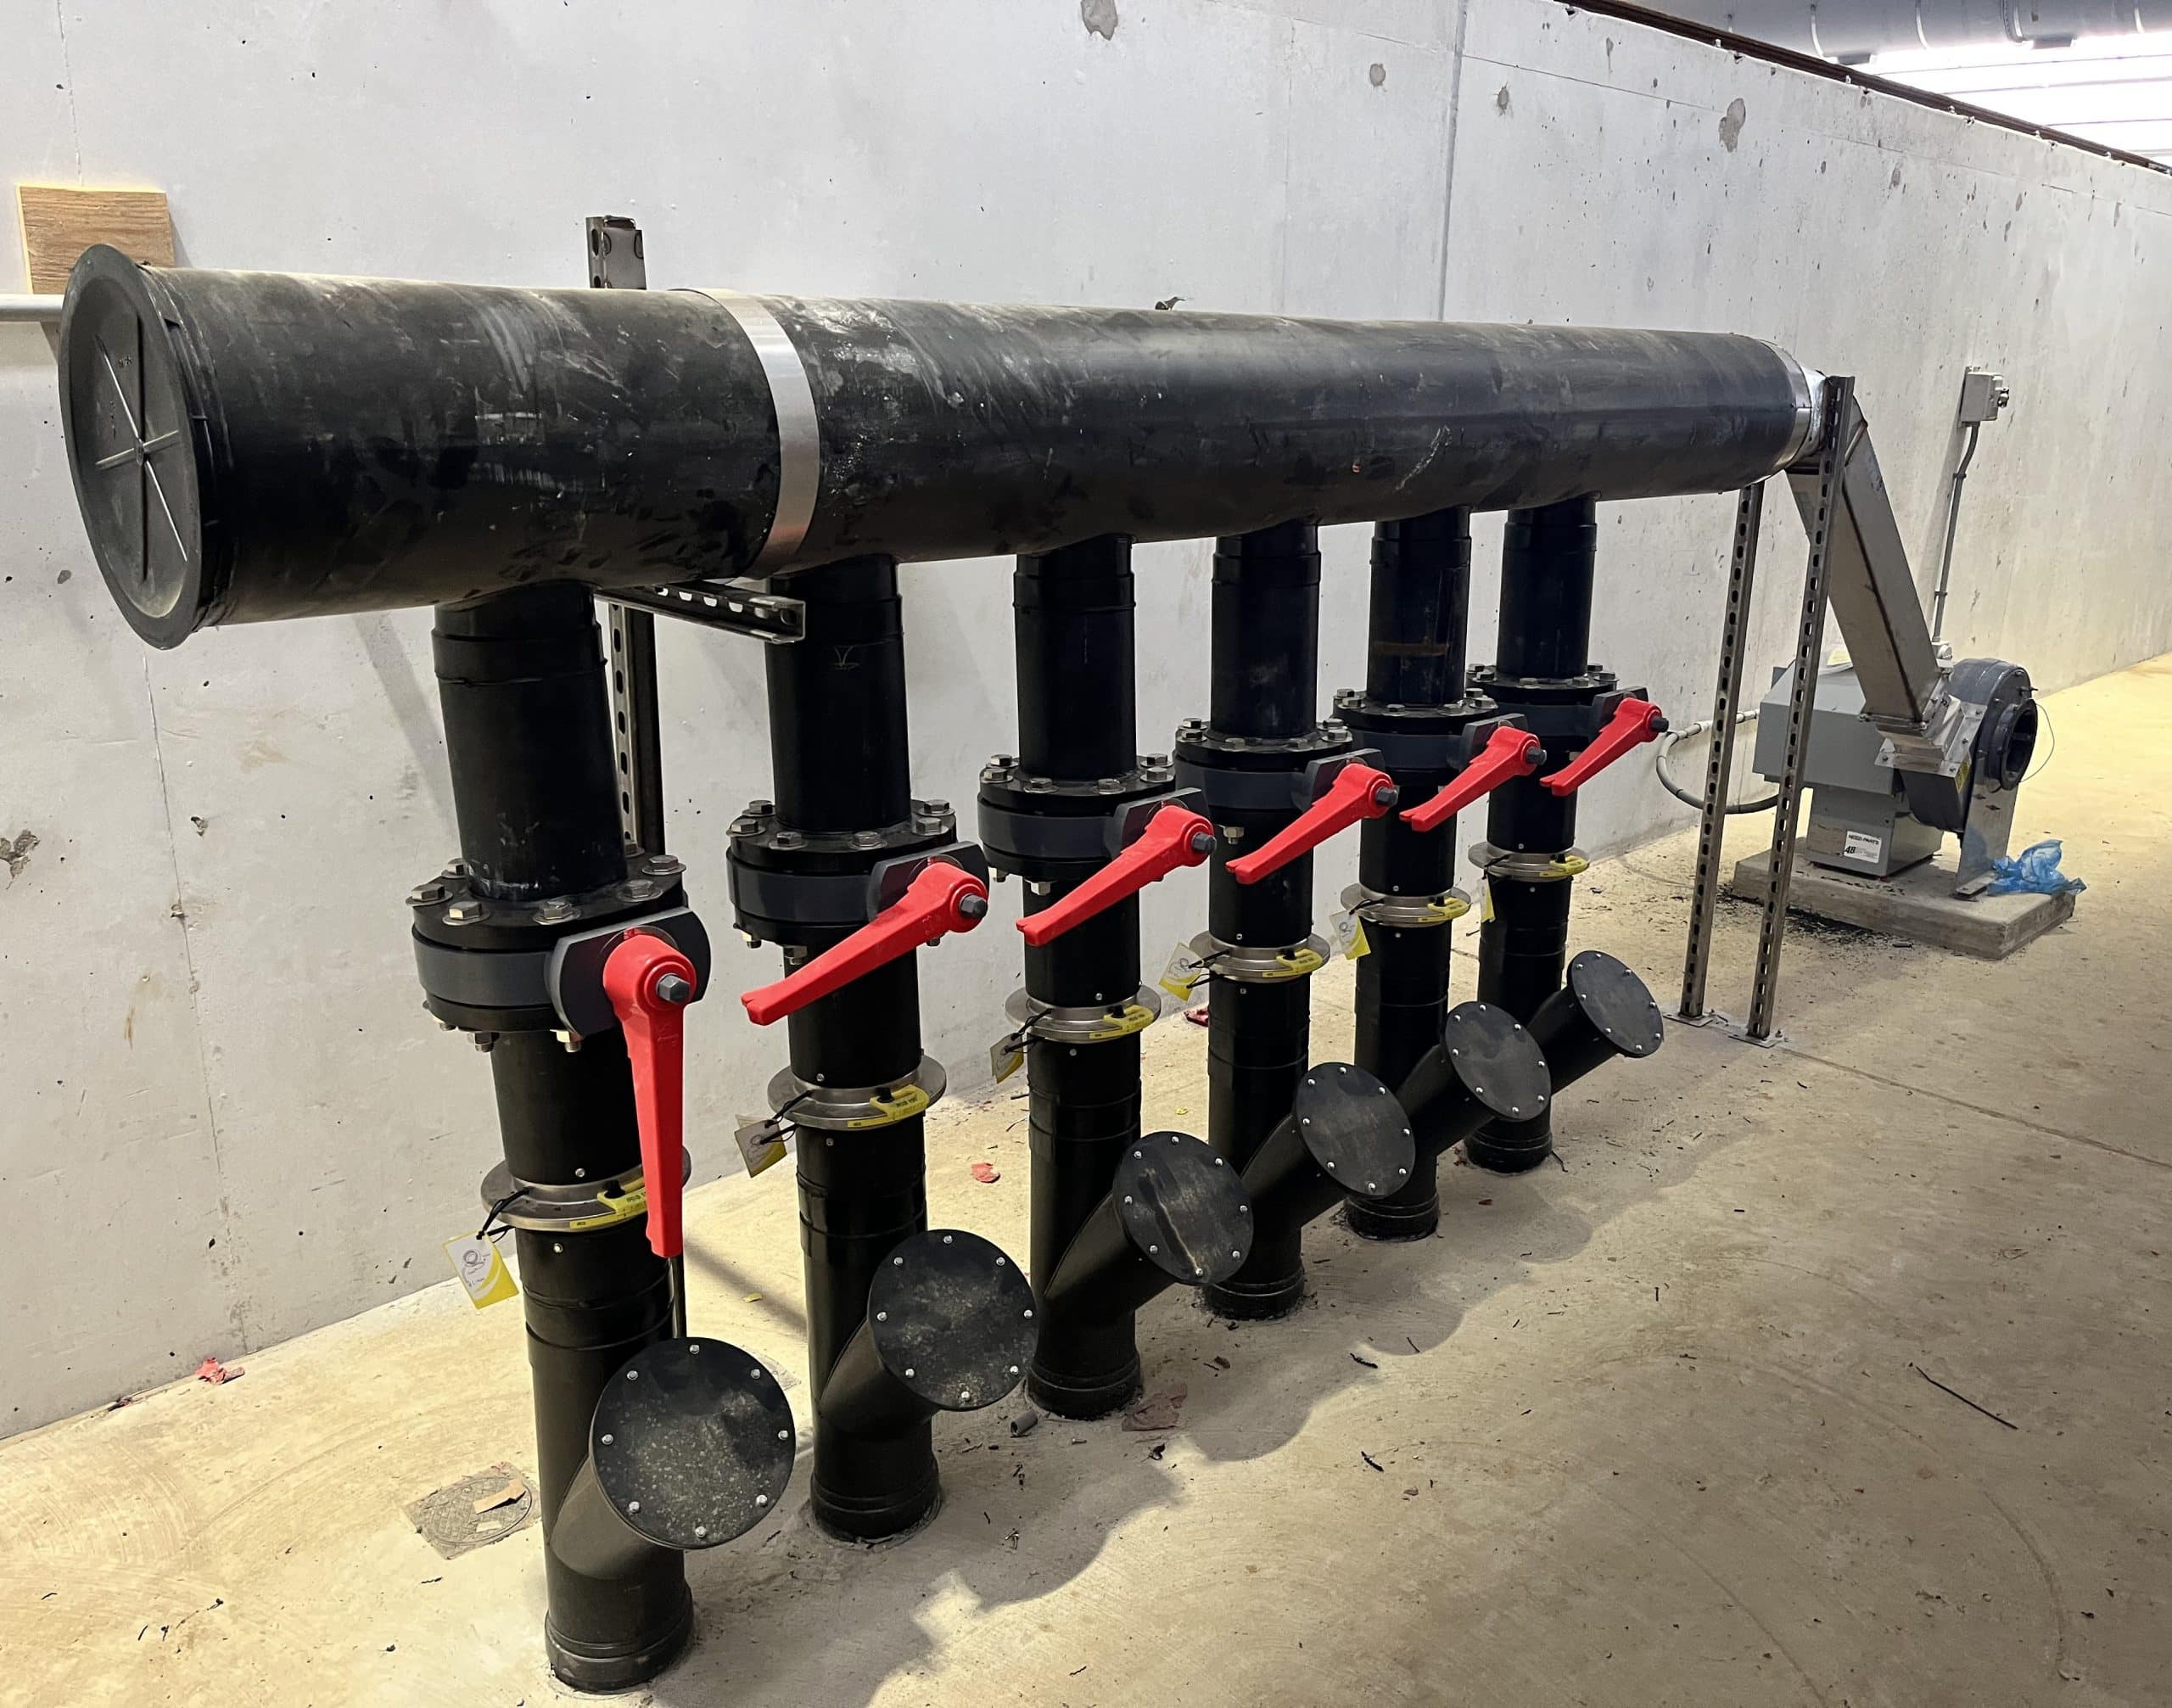 Aeration manifolds with Hartzell Air Movement Series 41 FRP pressure blowers